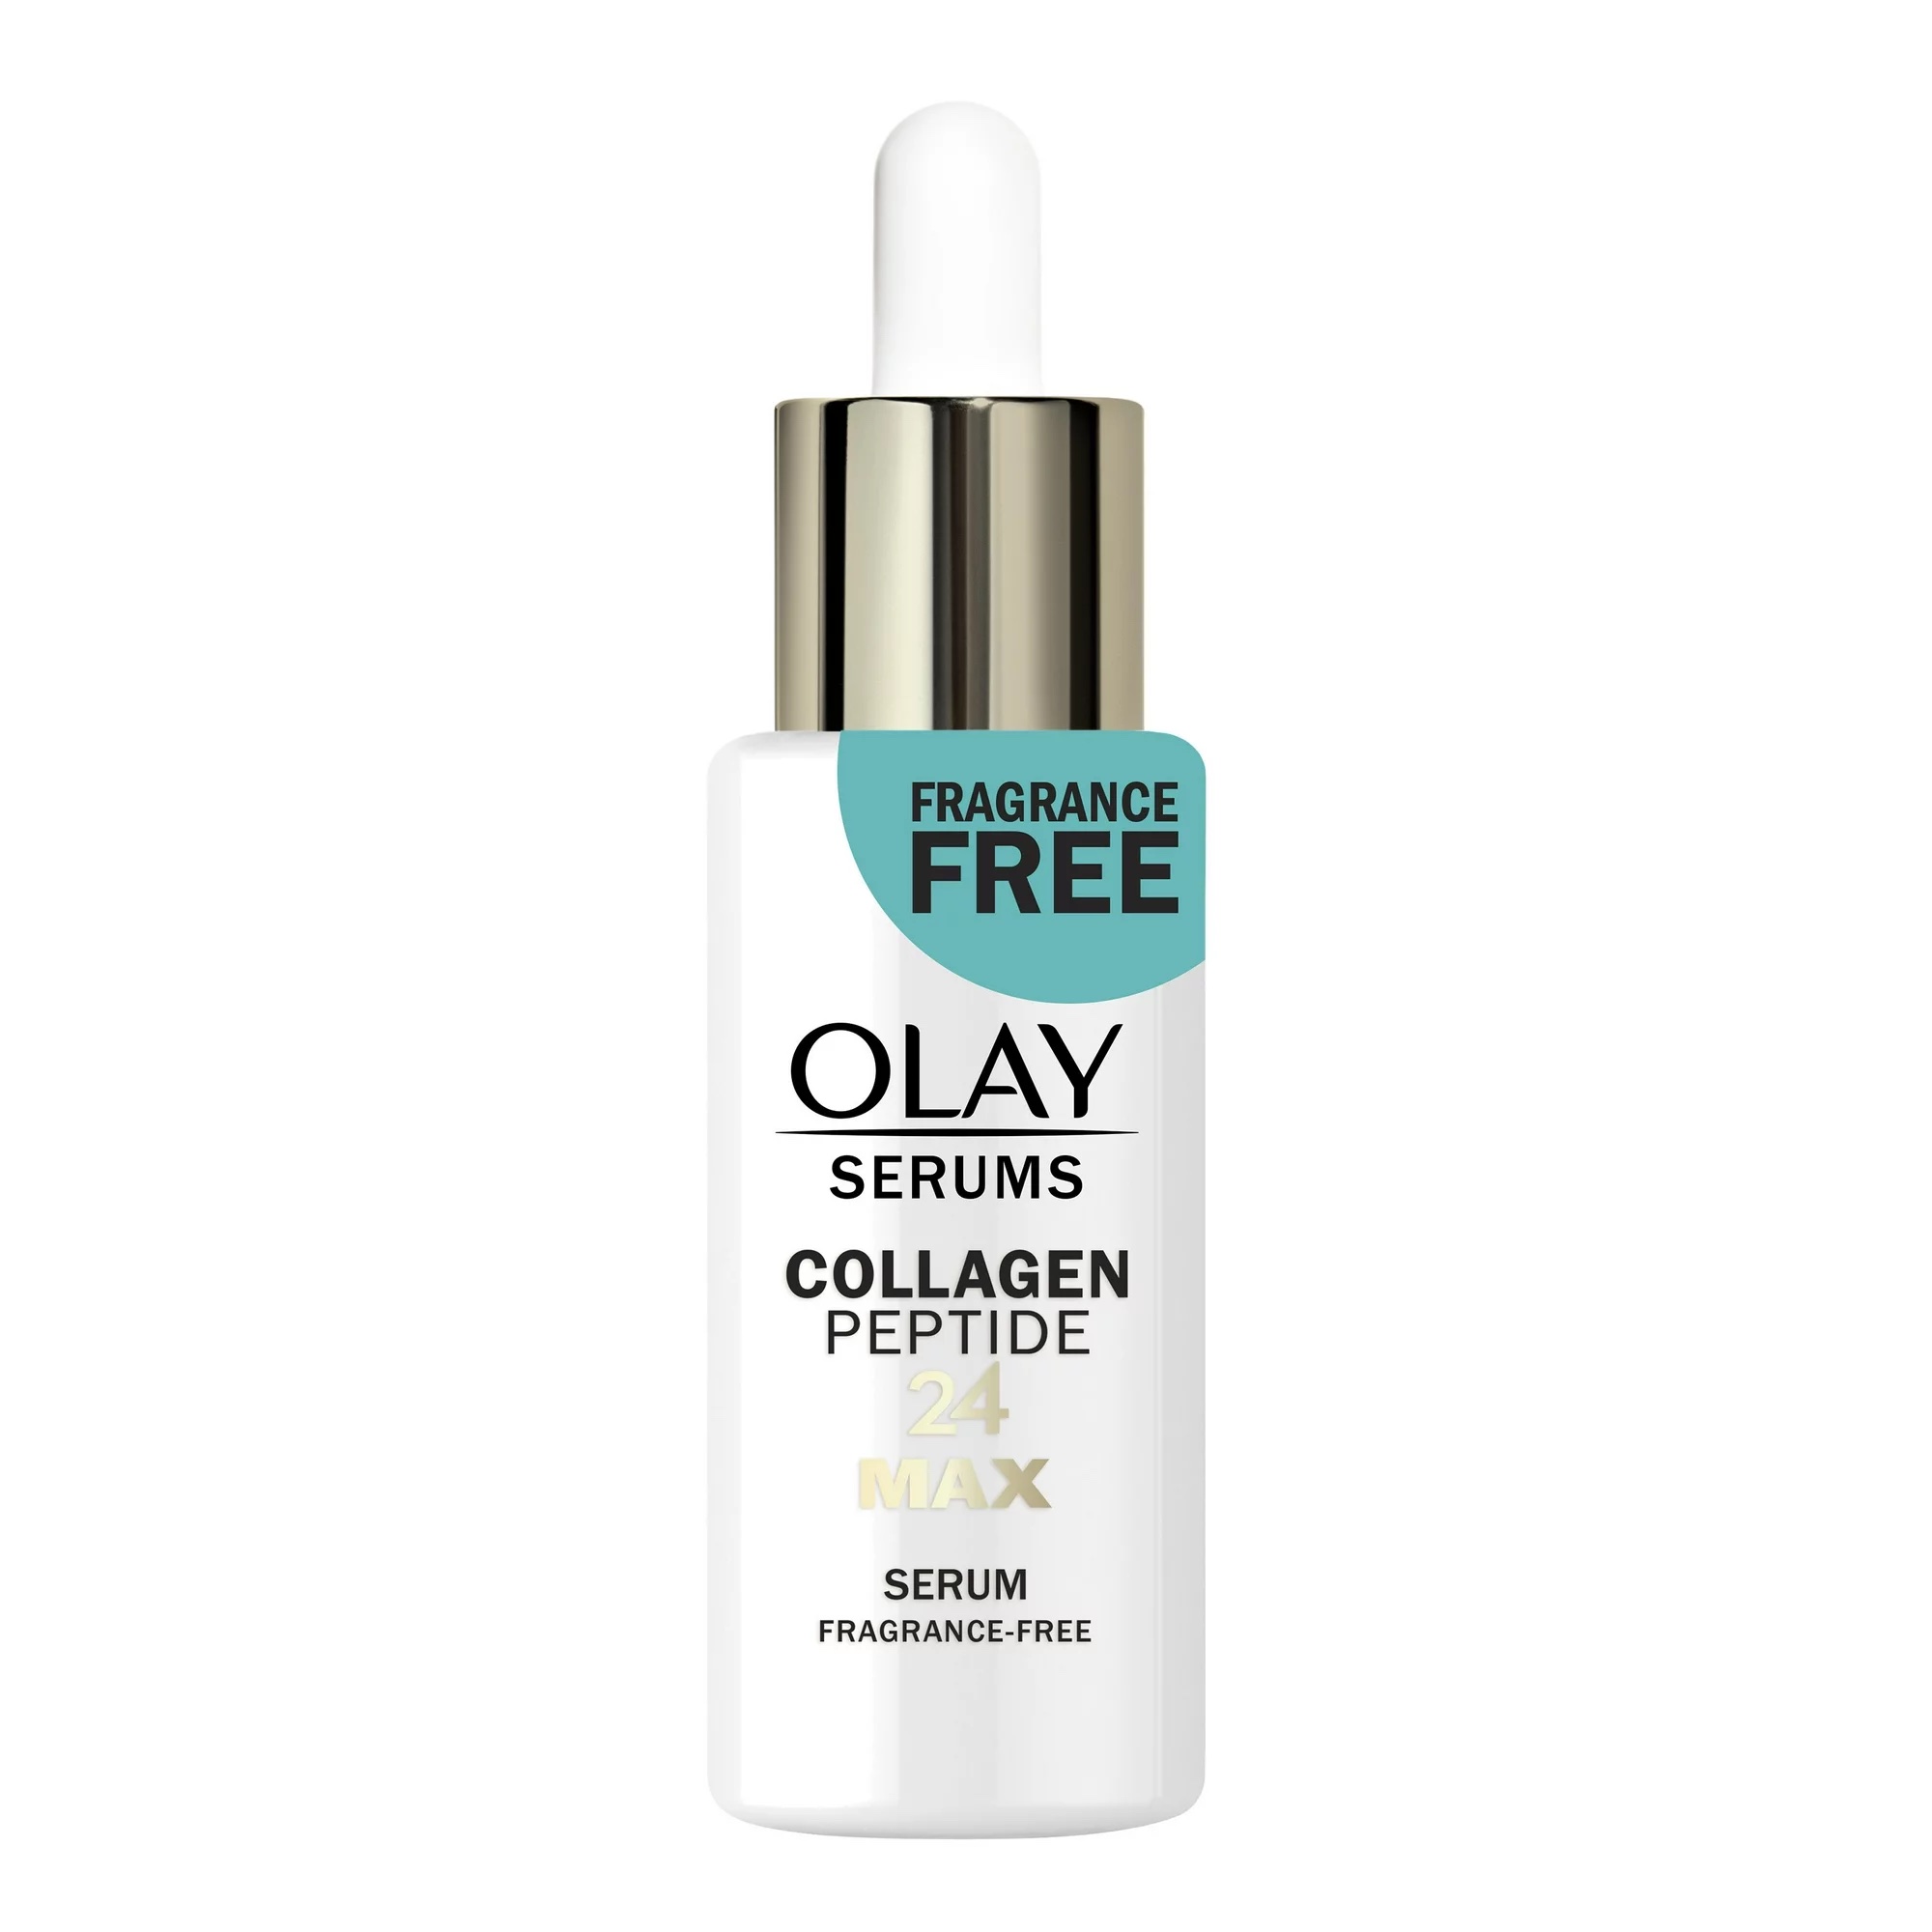 Olay Collagen Peptide 24 MAX Serum ohne Duftstoffe